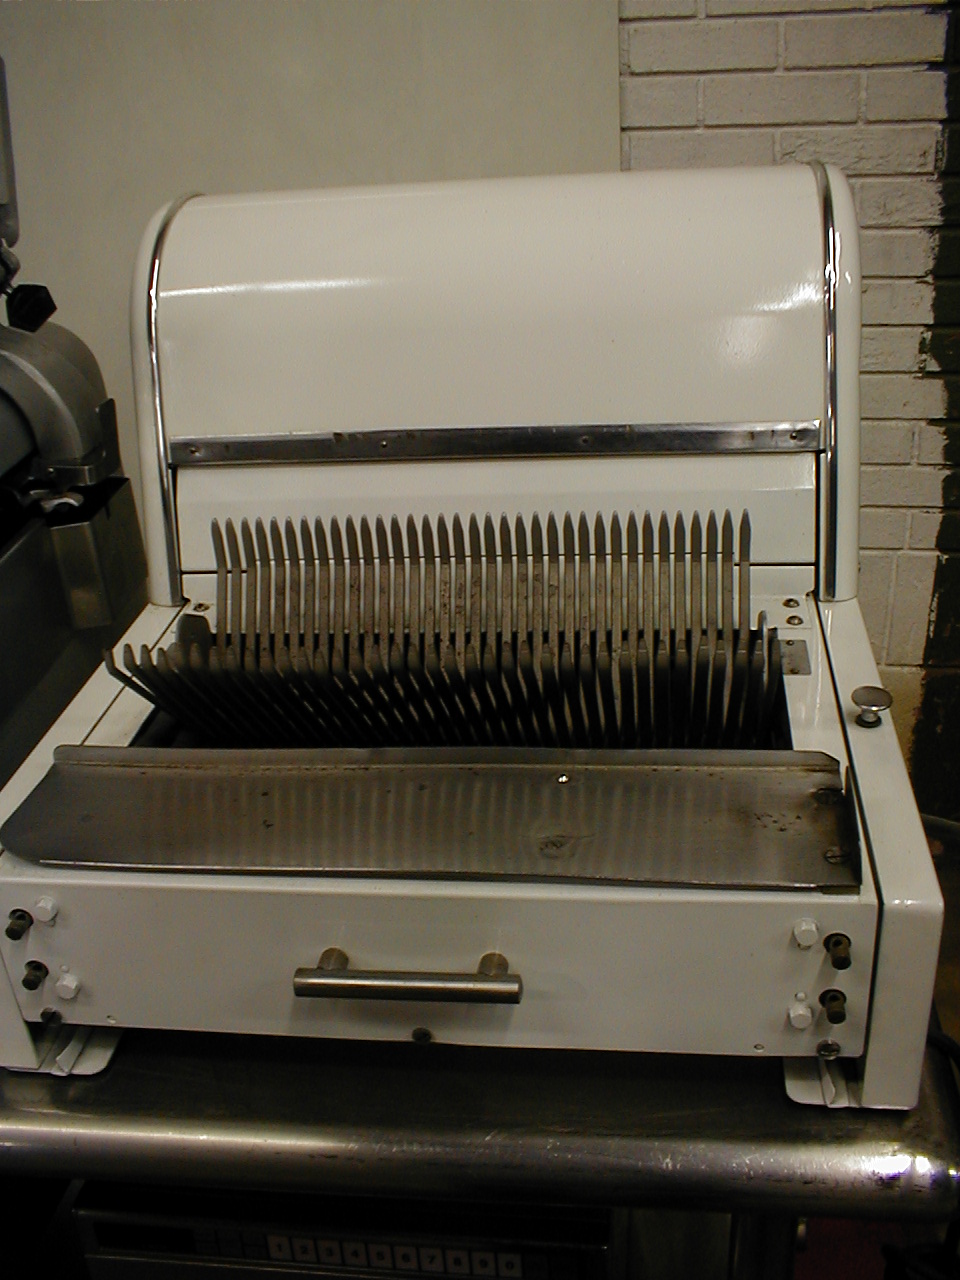 Berkel automatic bread slicer with new blades 115 voltage. Freight charges to be added to price